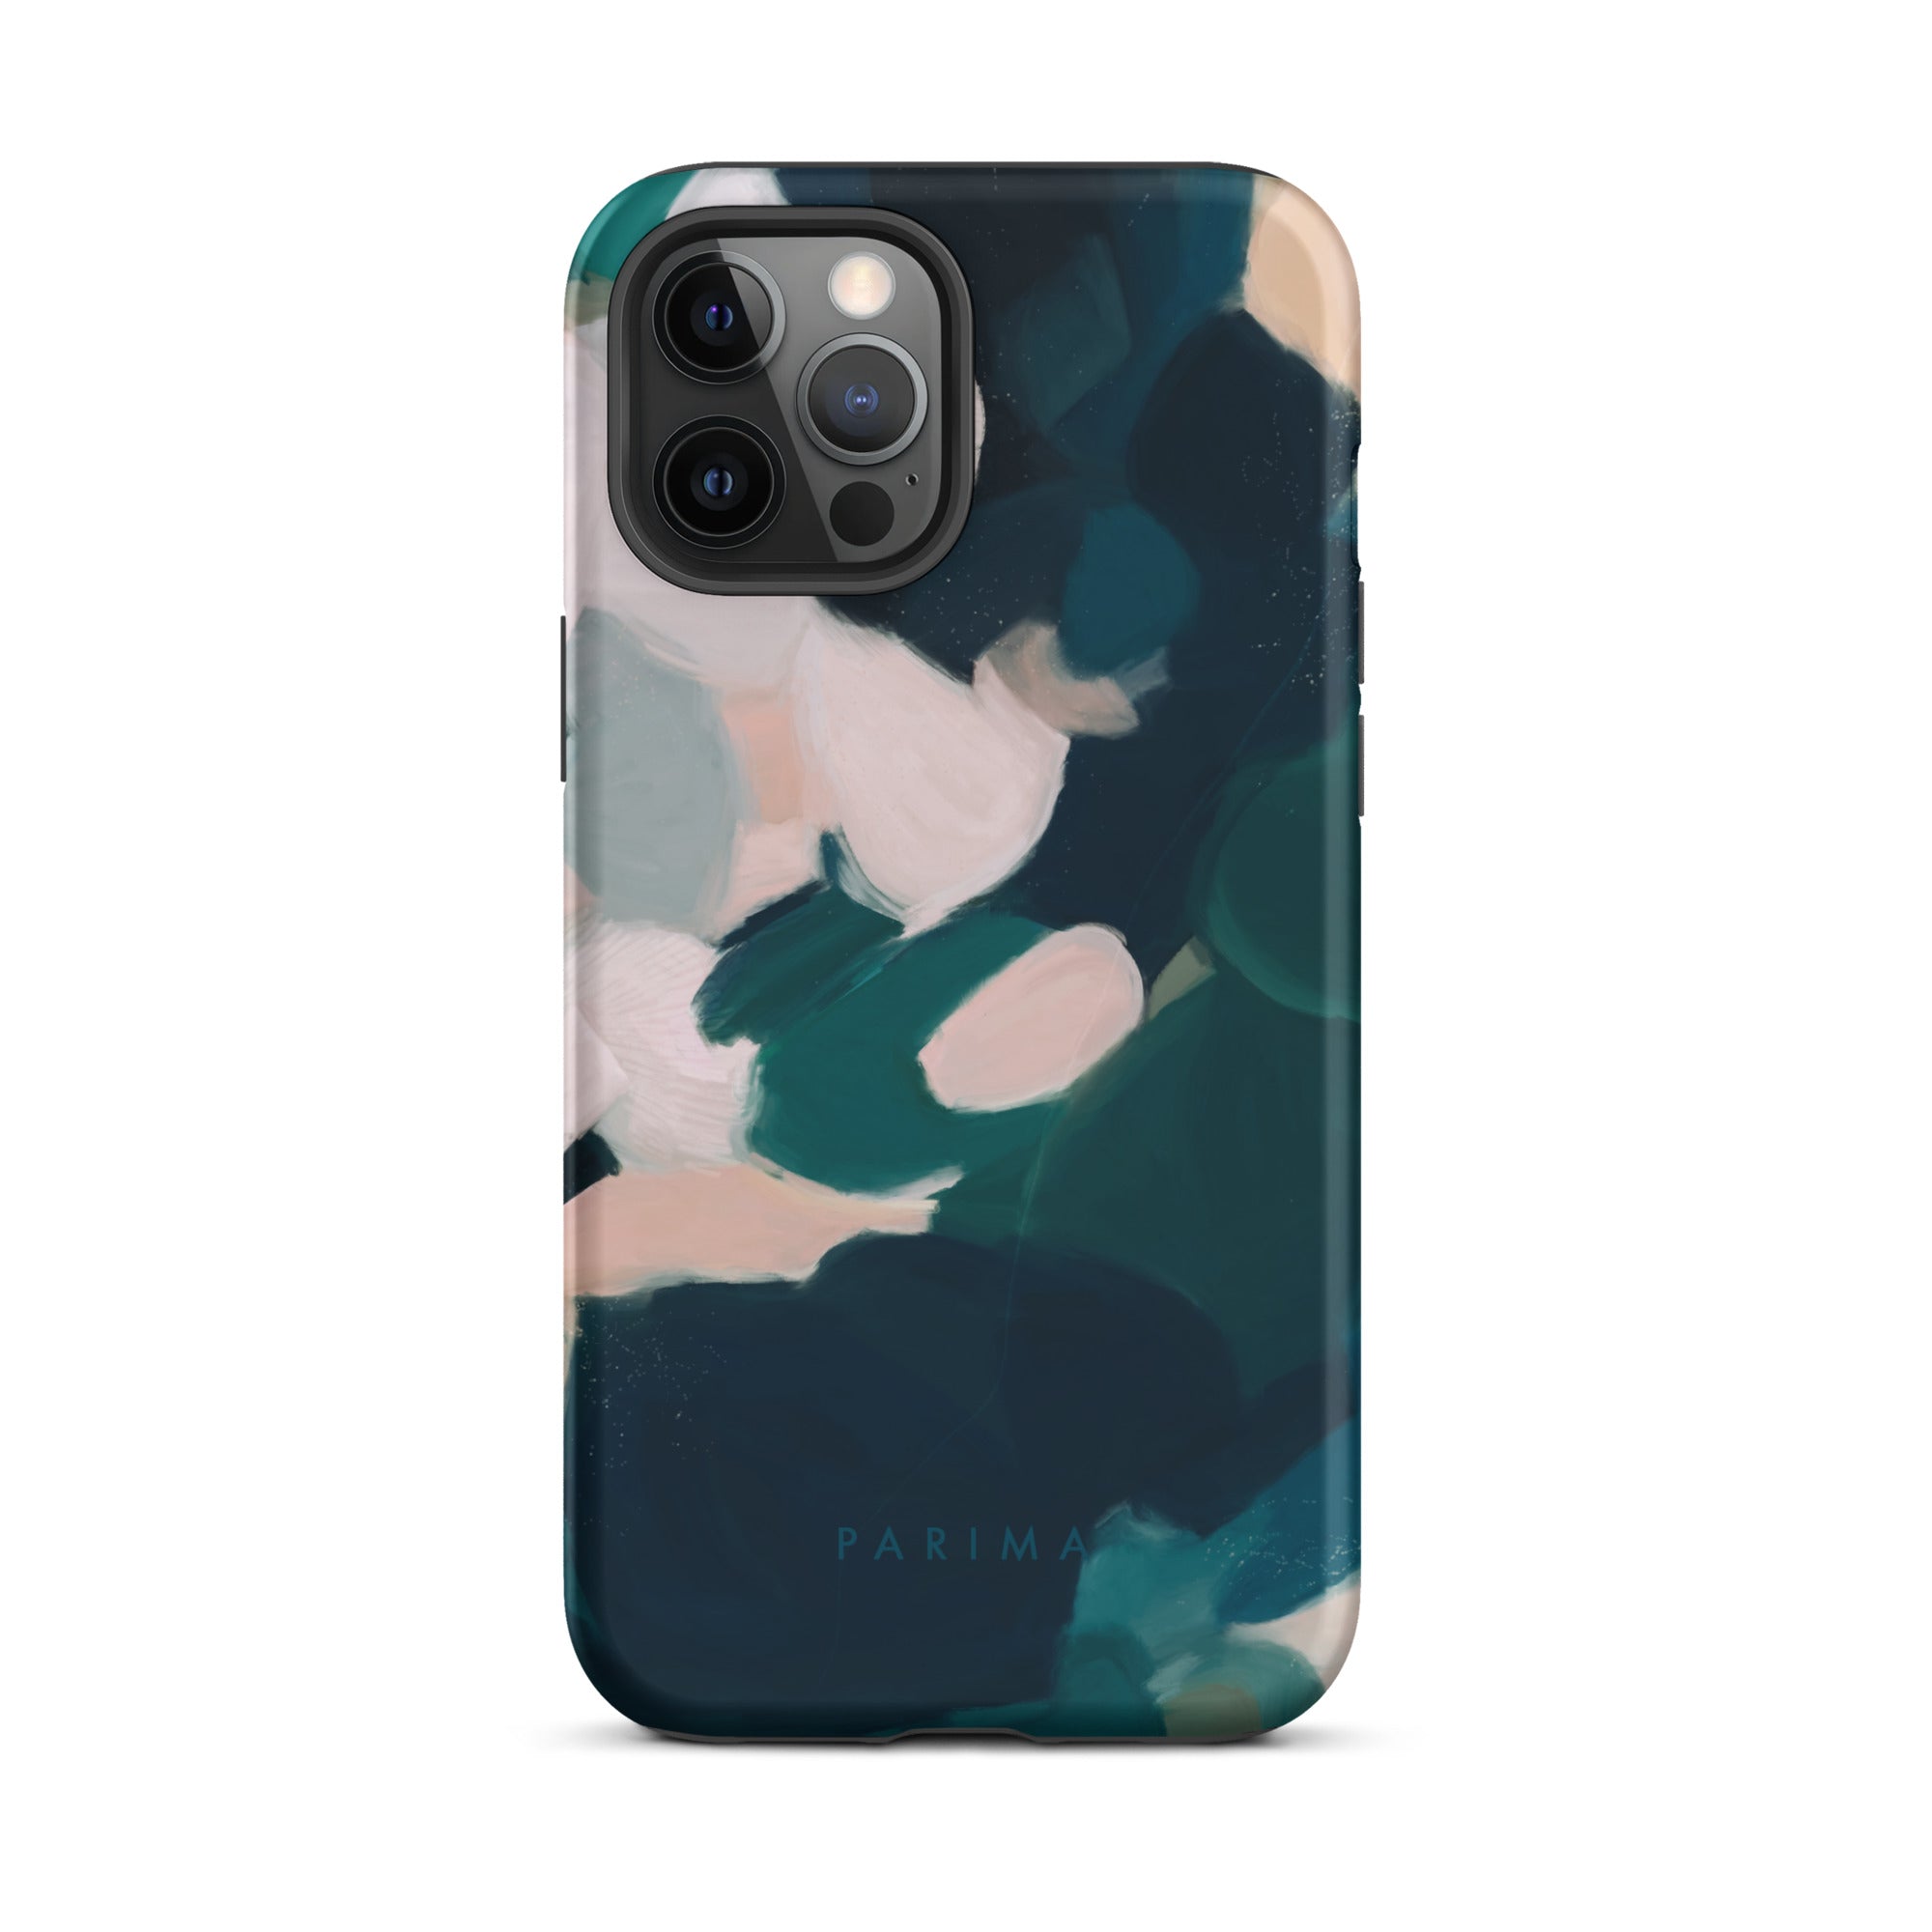 Aerwyn, green and pink abstract art - iPhone 12 Pro Max tough case by Parima Studio